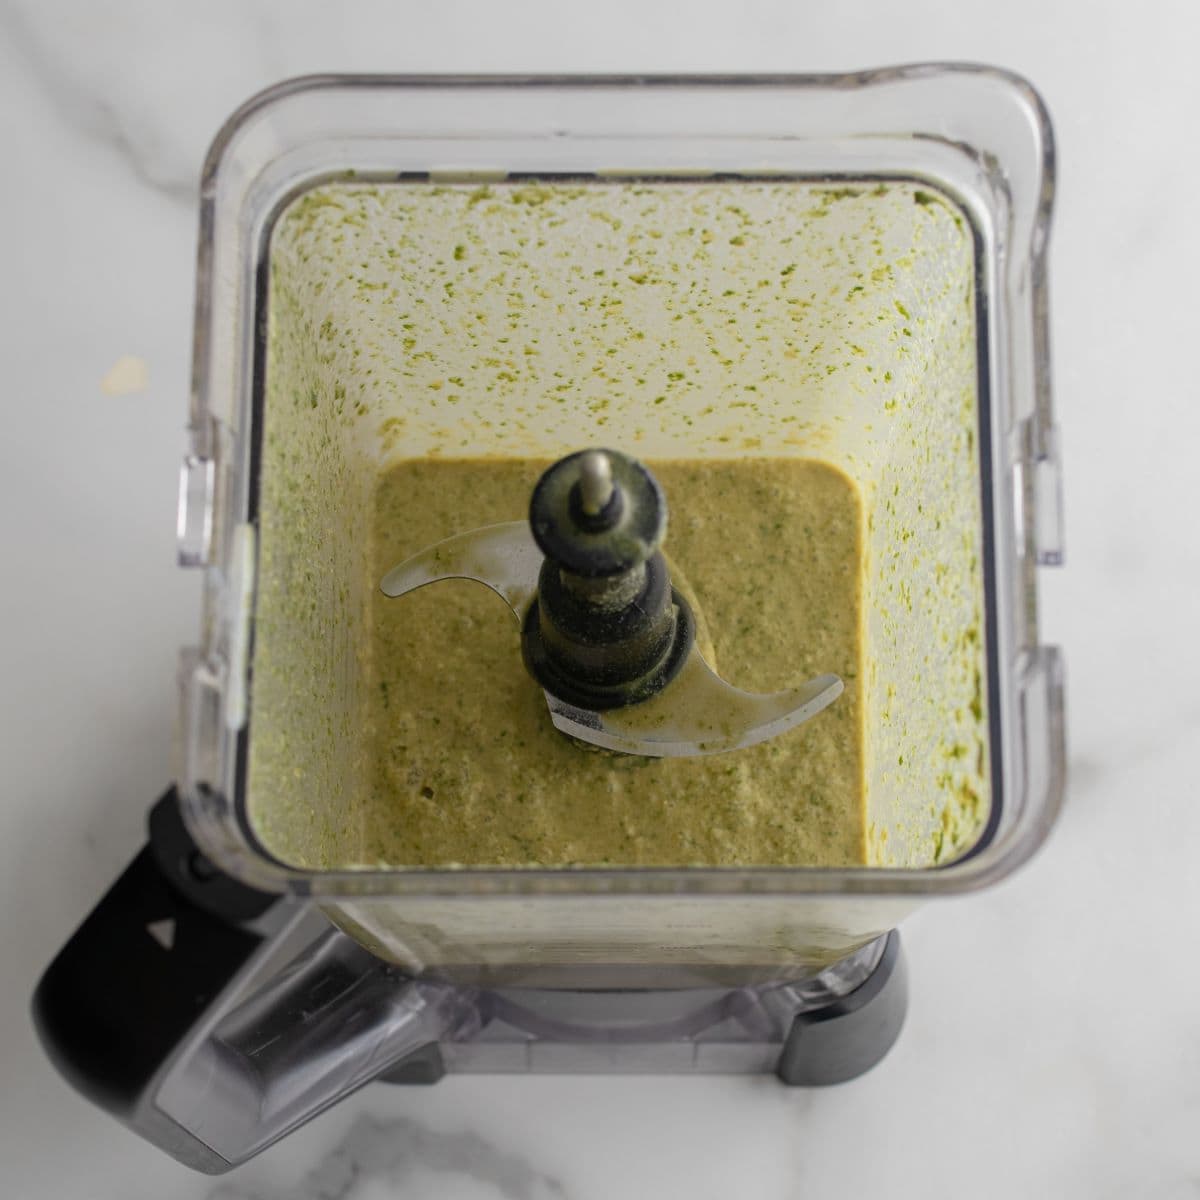 Blended coconut oil, coconut sugar, spinach, buttermilk, eggs and lemon zest in a blender container.